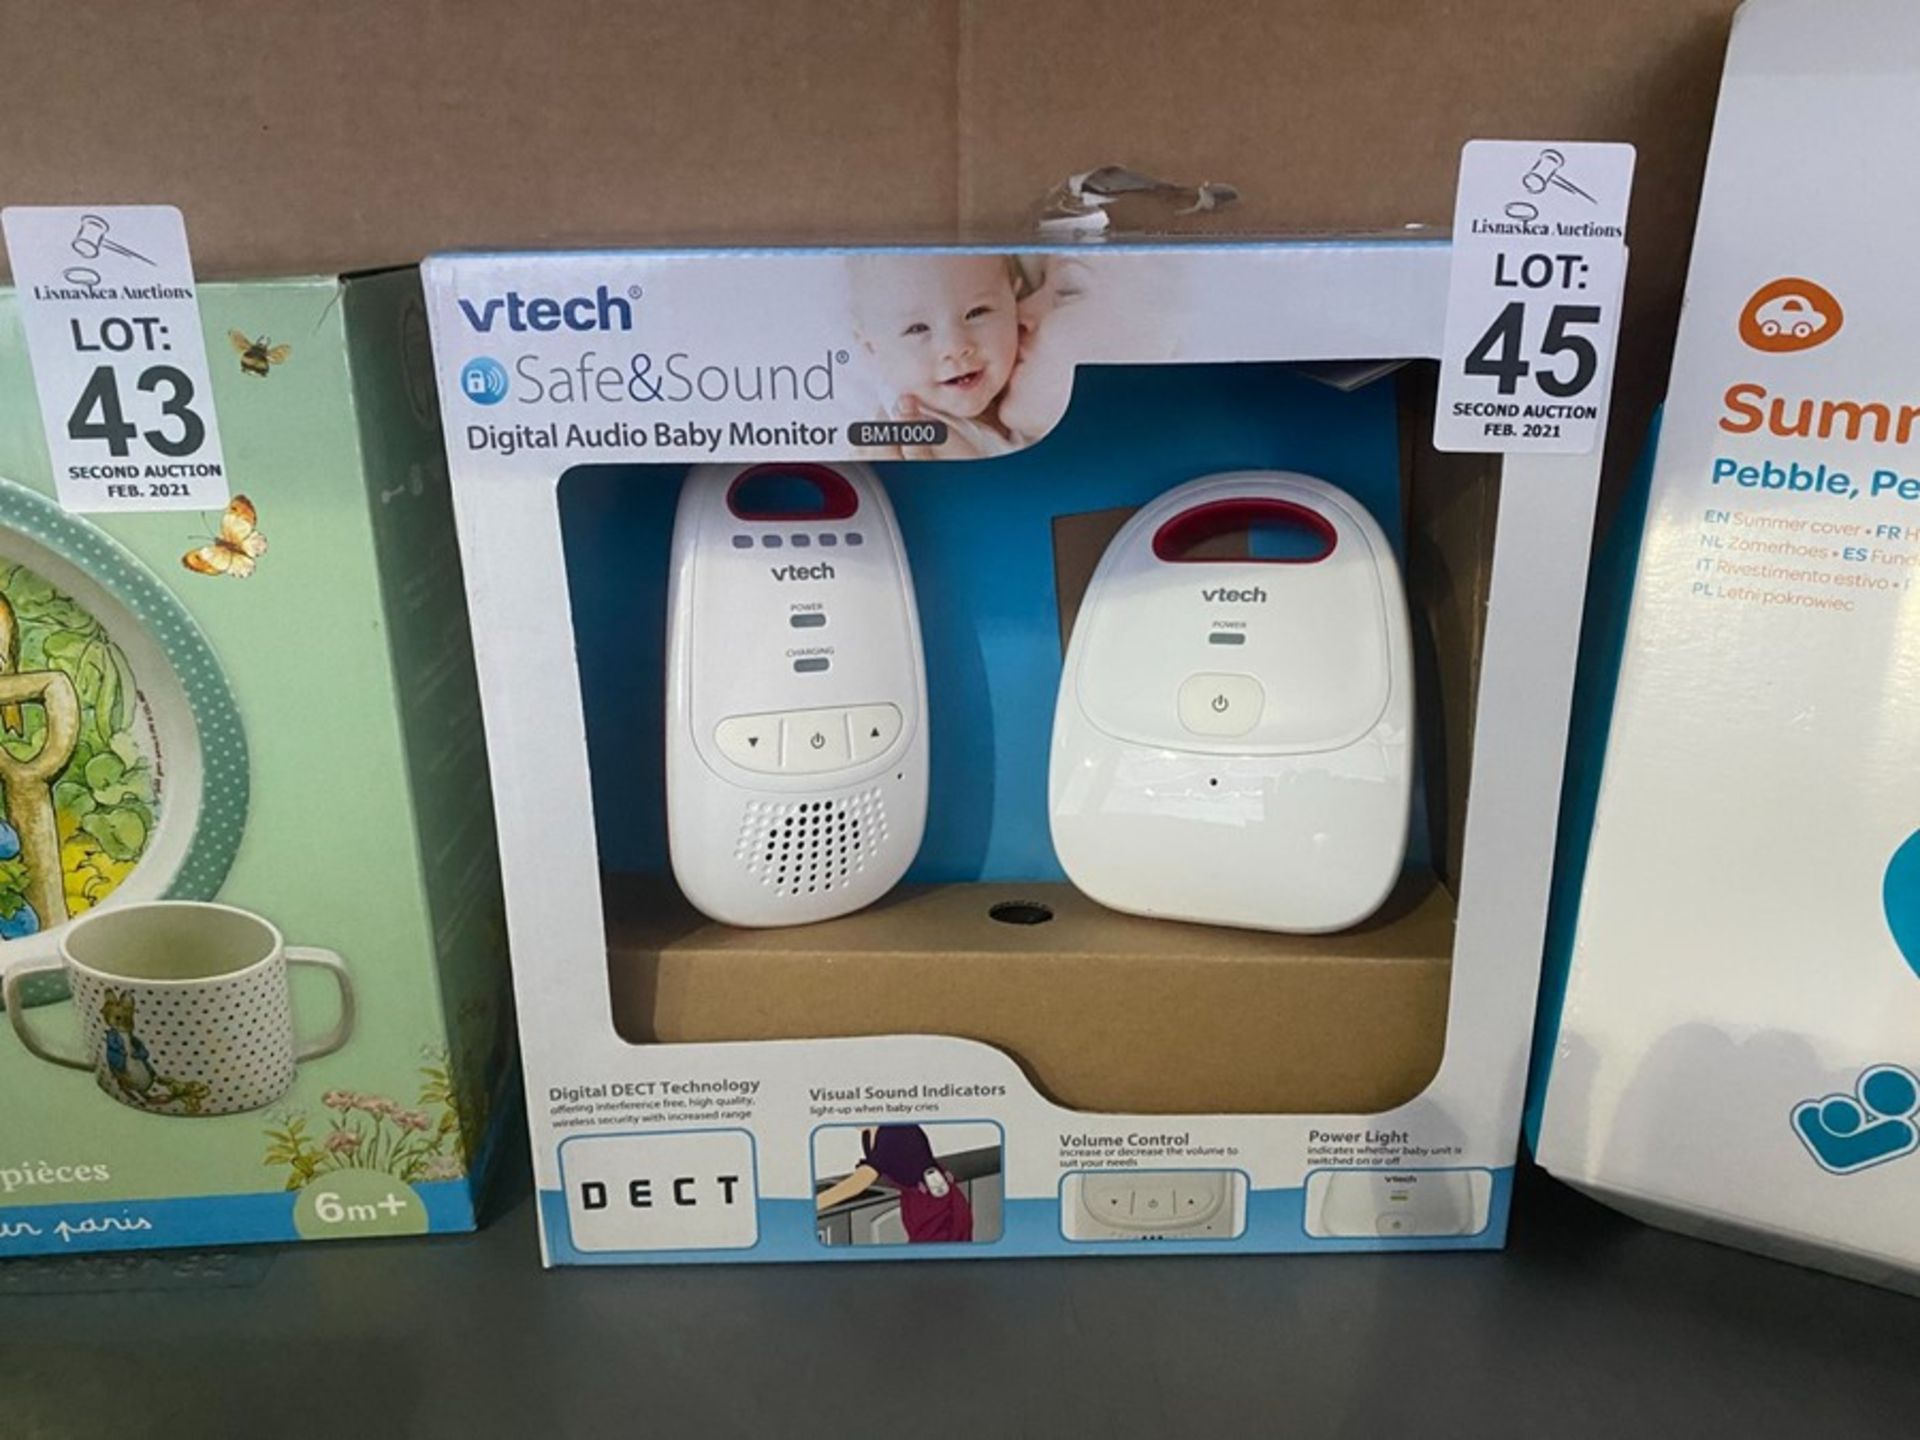 VTECH SAFE AND SOUND DIGITAL AUDIO BABY MONITOR